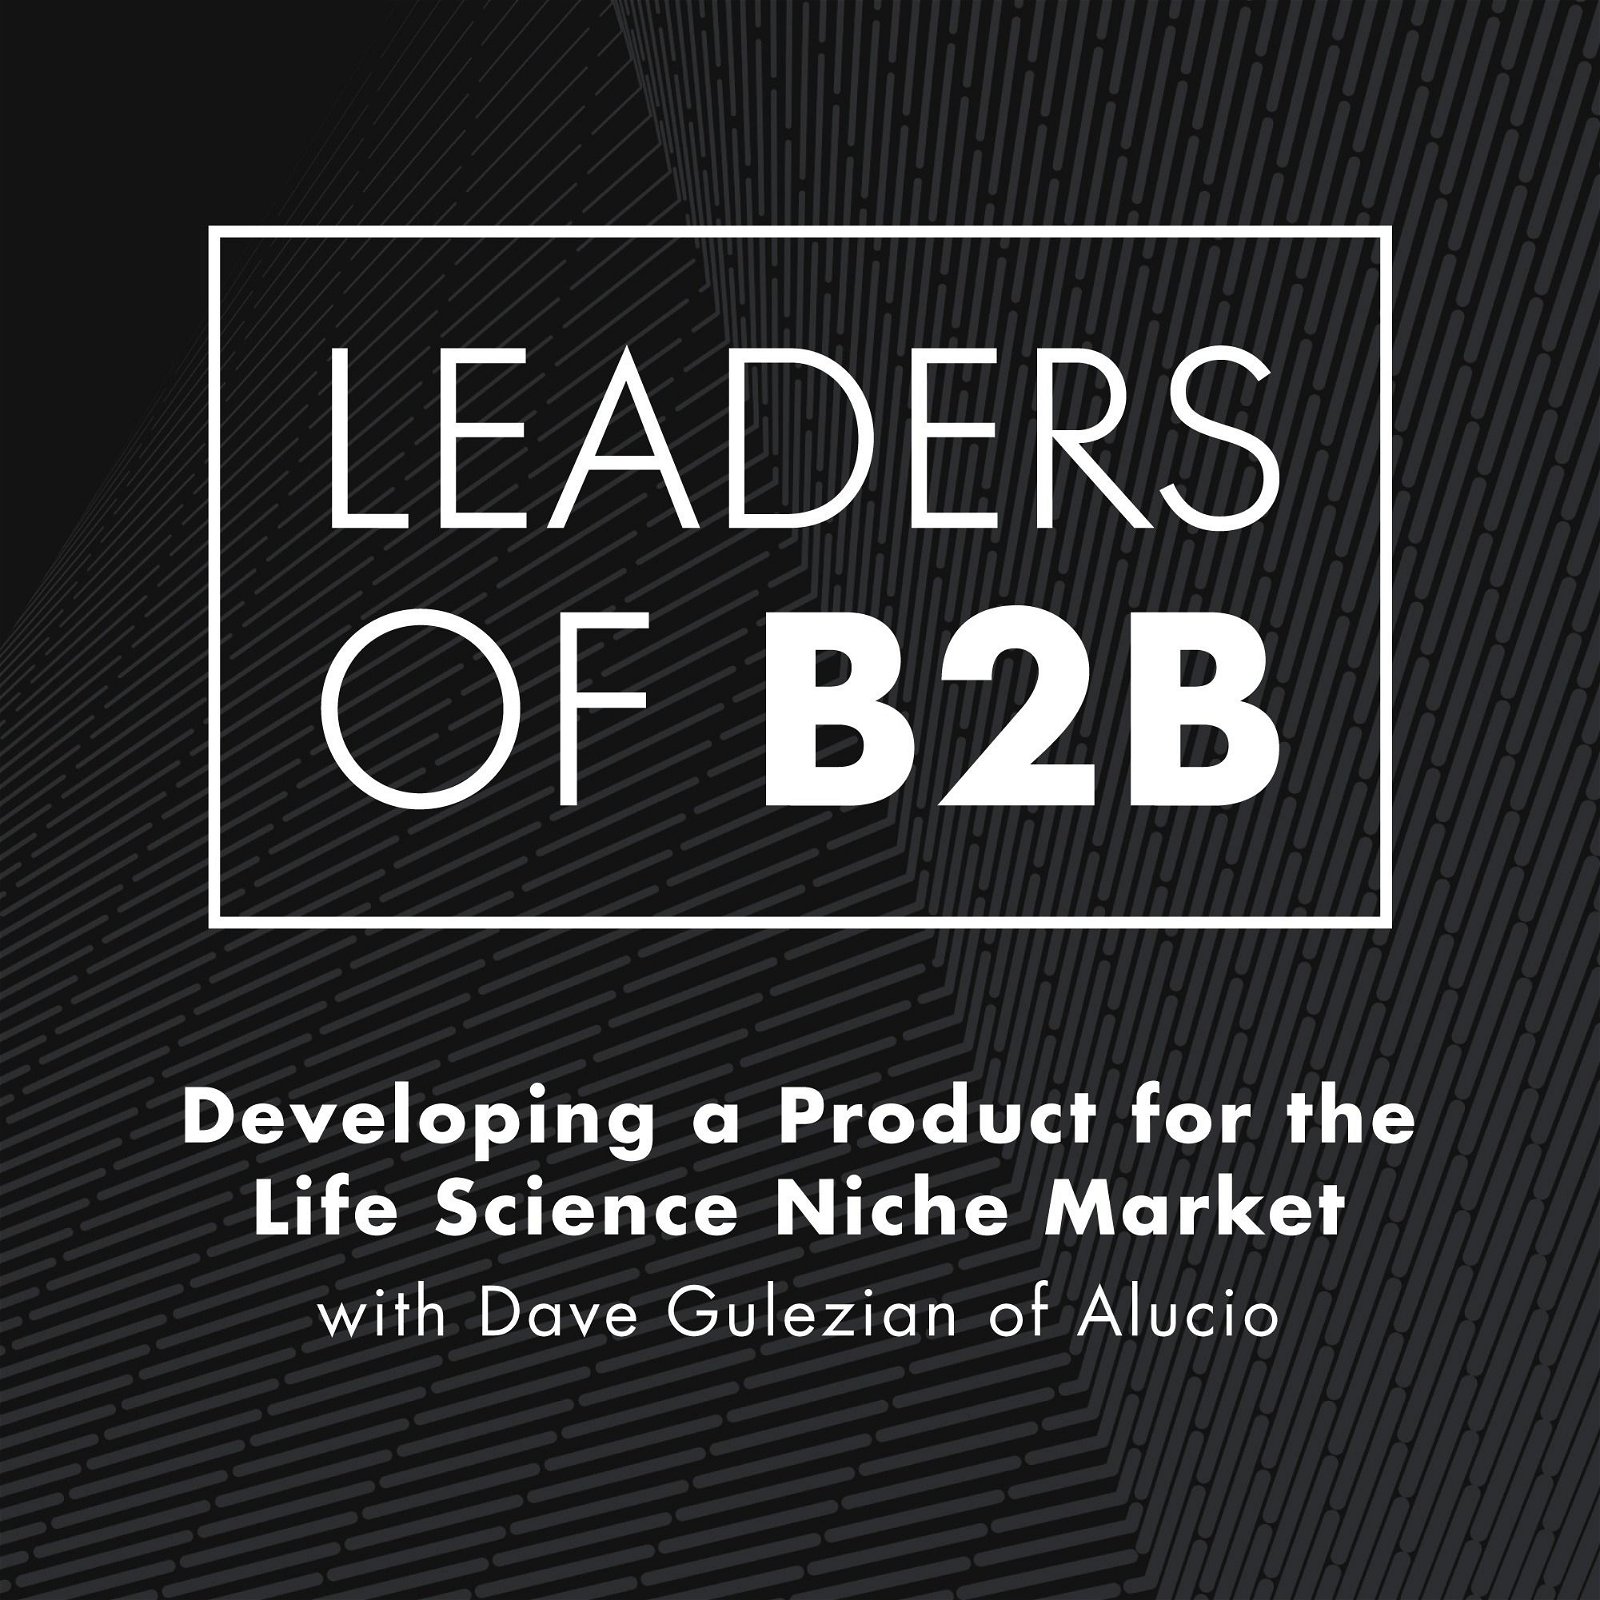 Developing a Product for the Life Science Niche Market with Dave Gulezian of Alucio